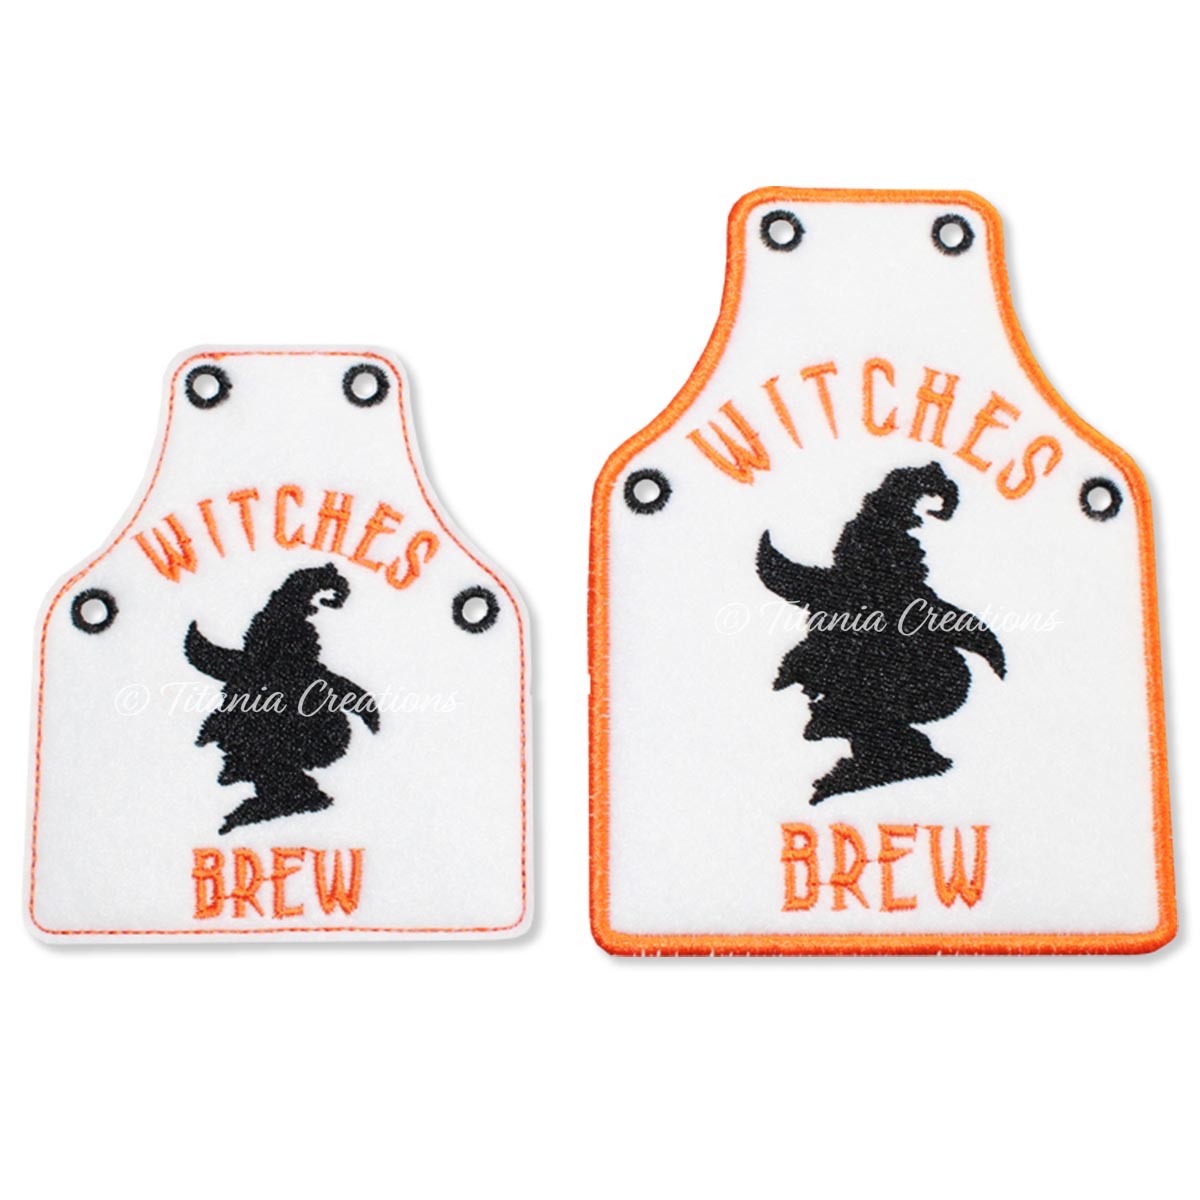 ITH Witches Brew Bottle Apron 4x4 5x7